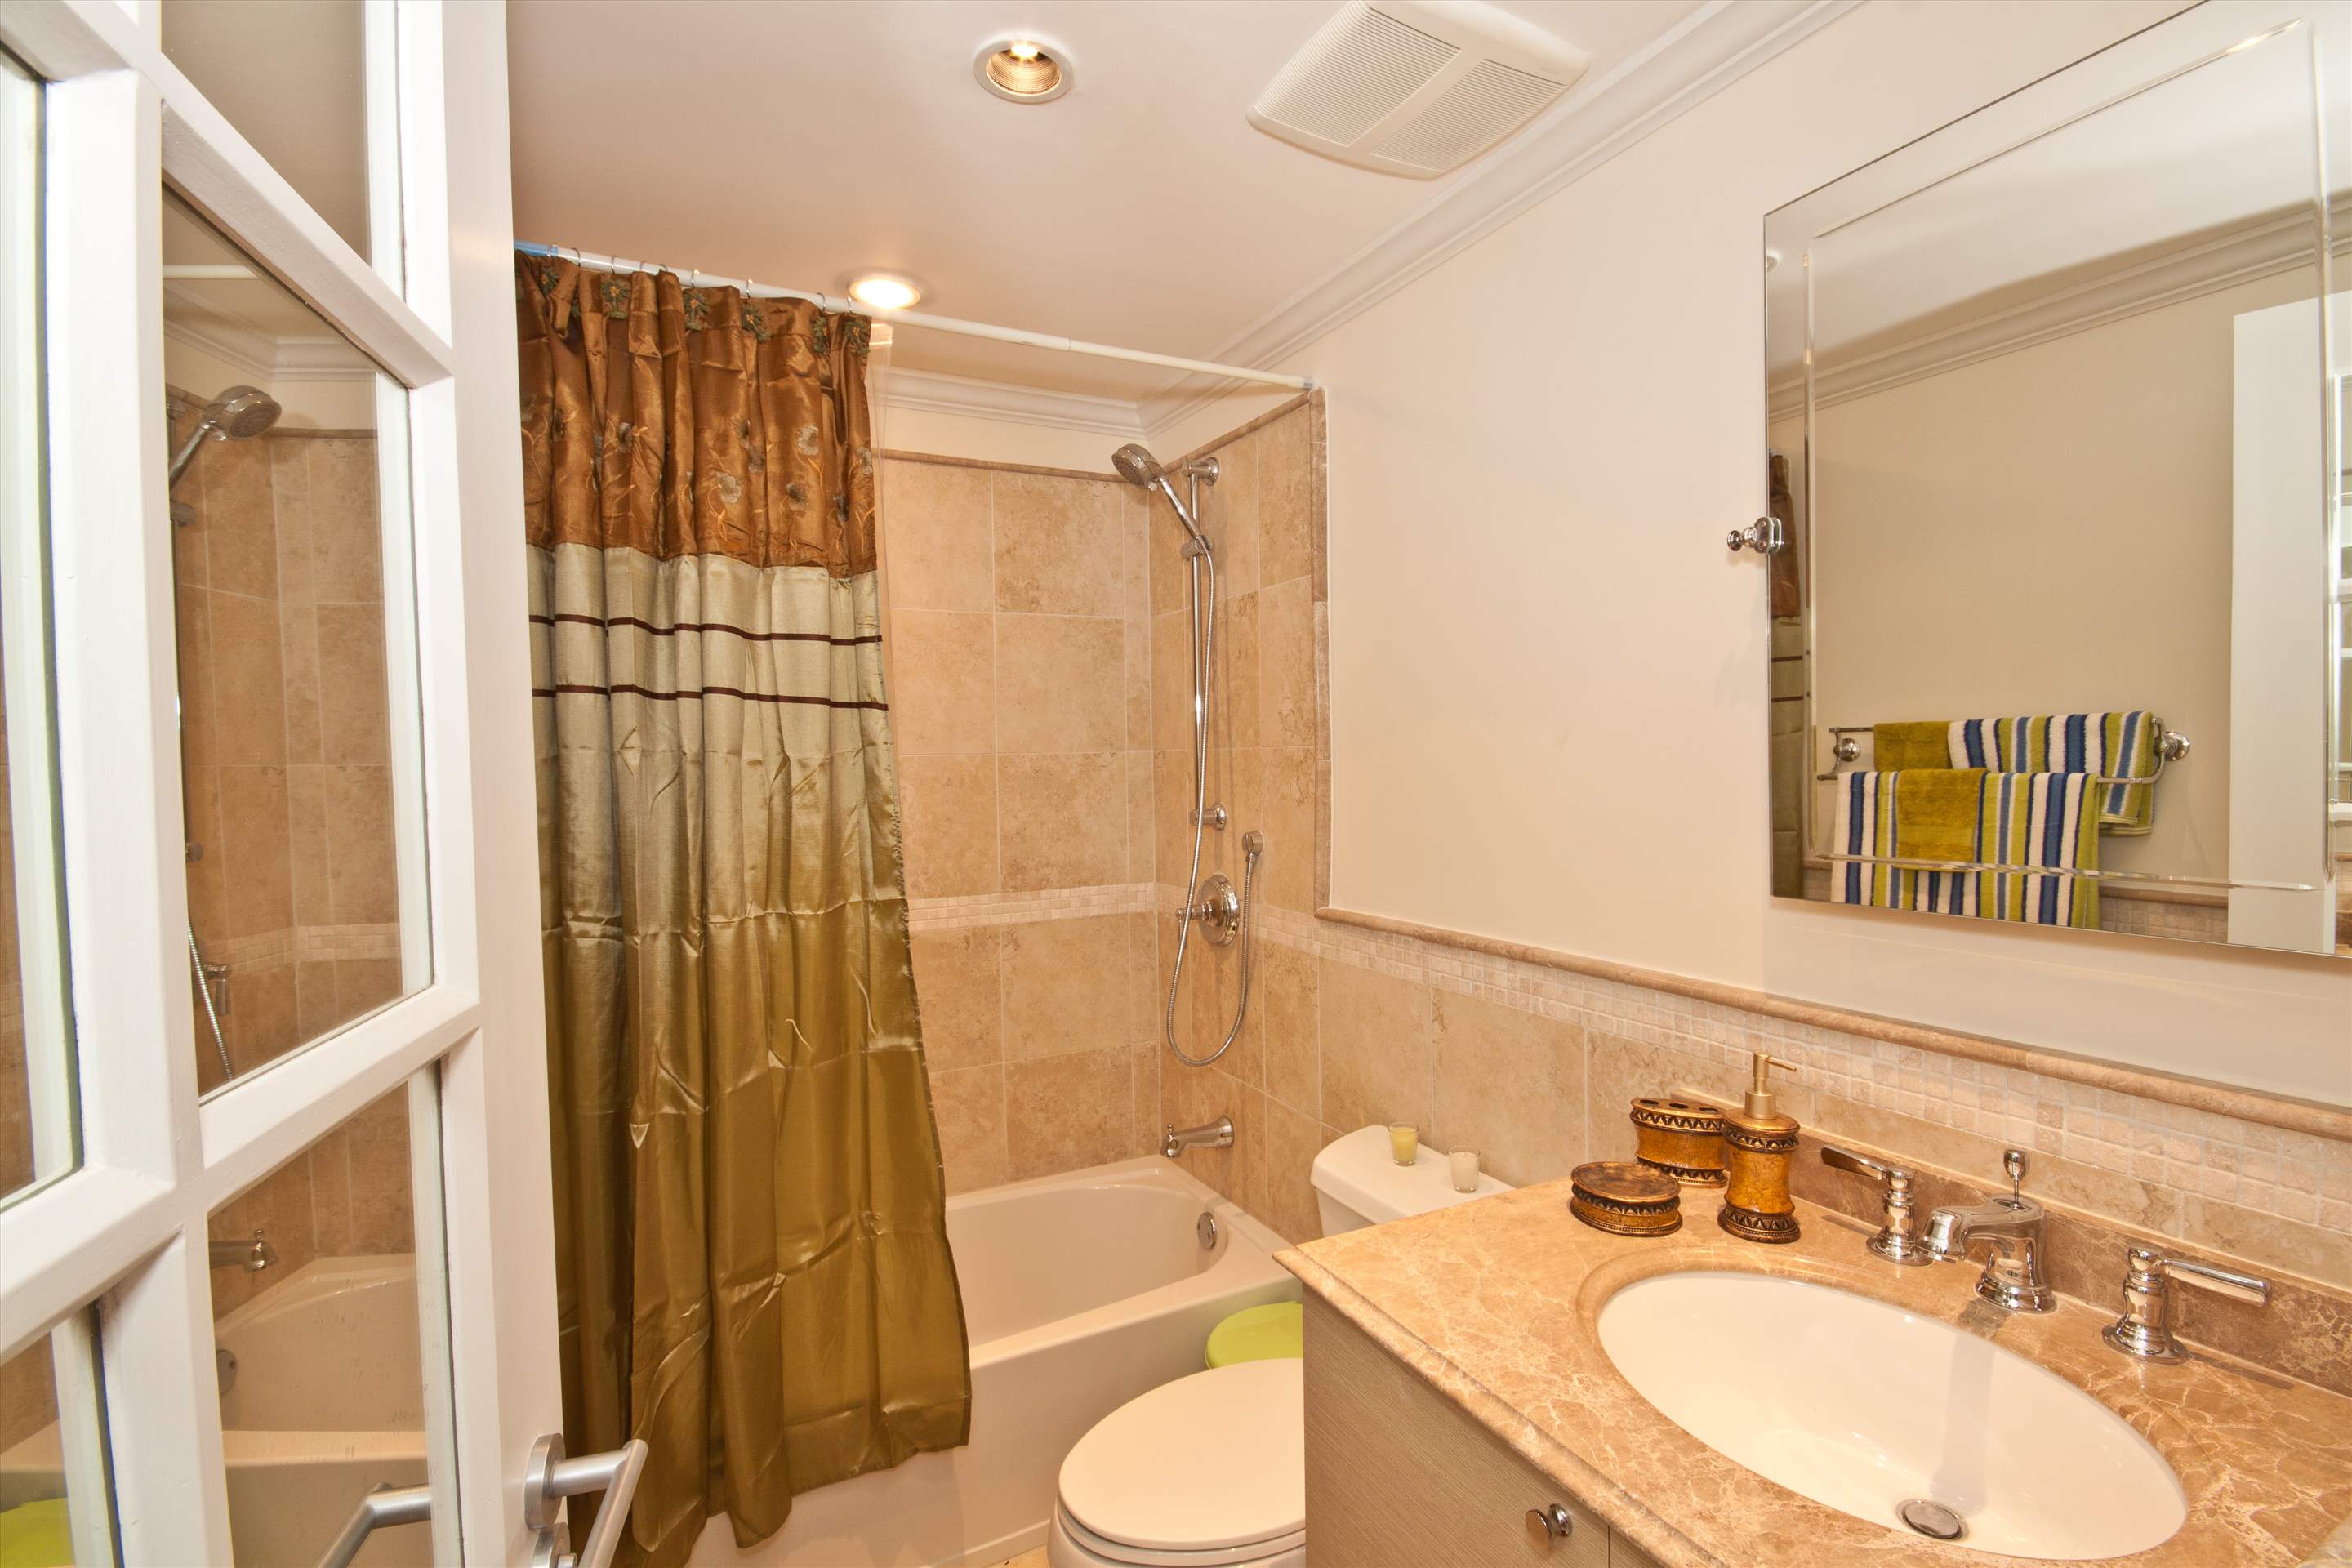 Sapphire Beach 118, 2 bedroom , 2 bedroom apartment in St. Lawrence Gap & South Coast, Barbados Photo #8